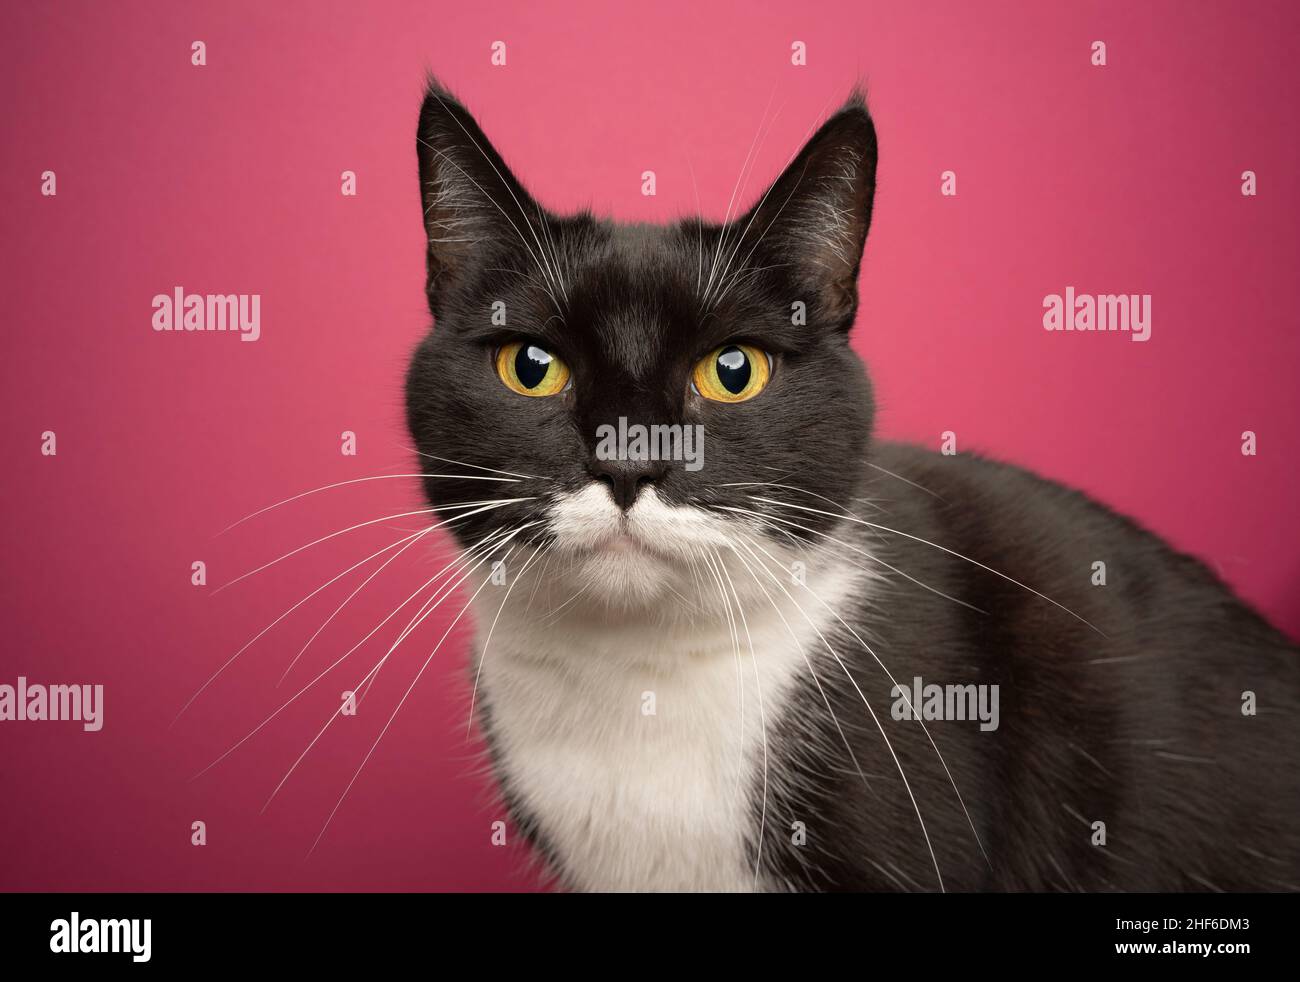 black and white tuxedo cat with yellow eyes looking at camera portrait on pink background Stock Photo